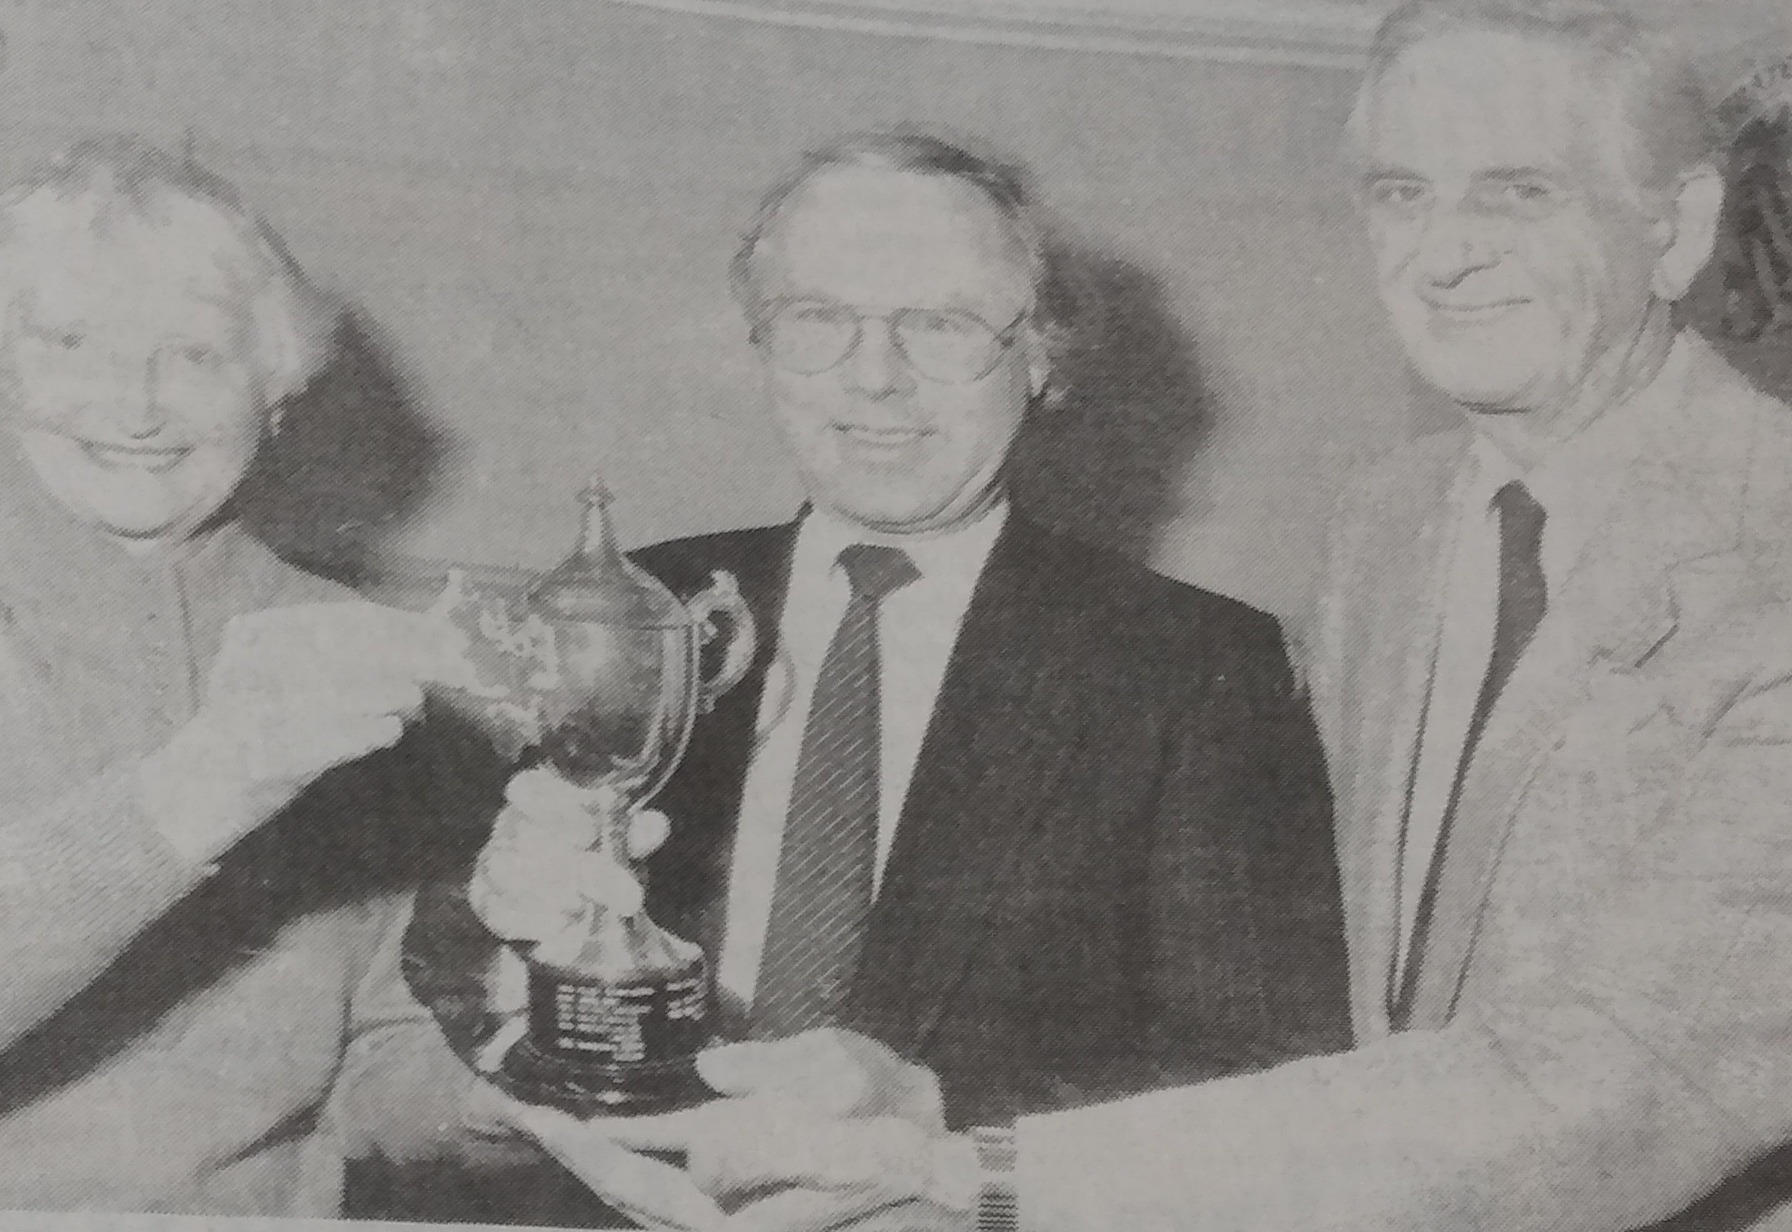 Dennis Golding (centre) with his Warfield prize which he won in 1993